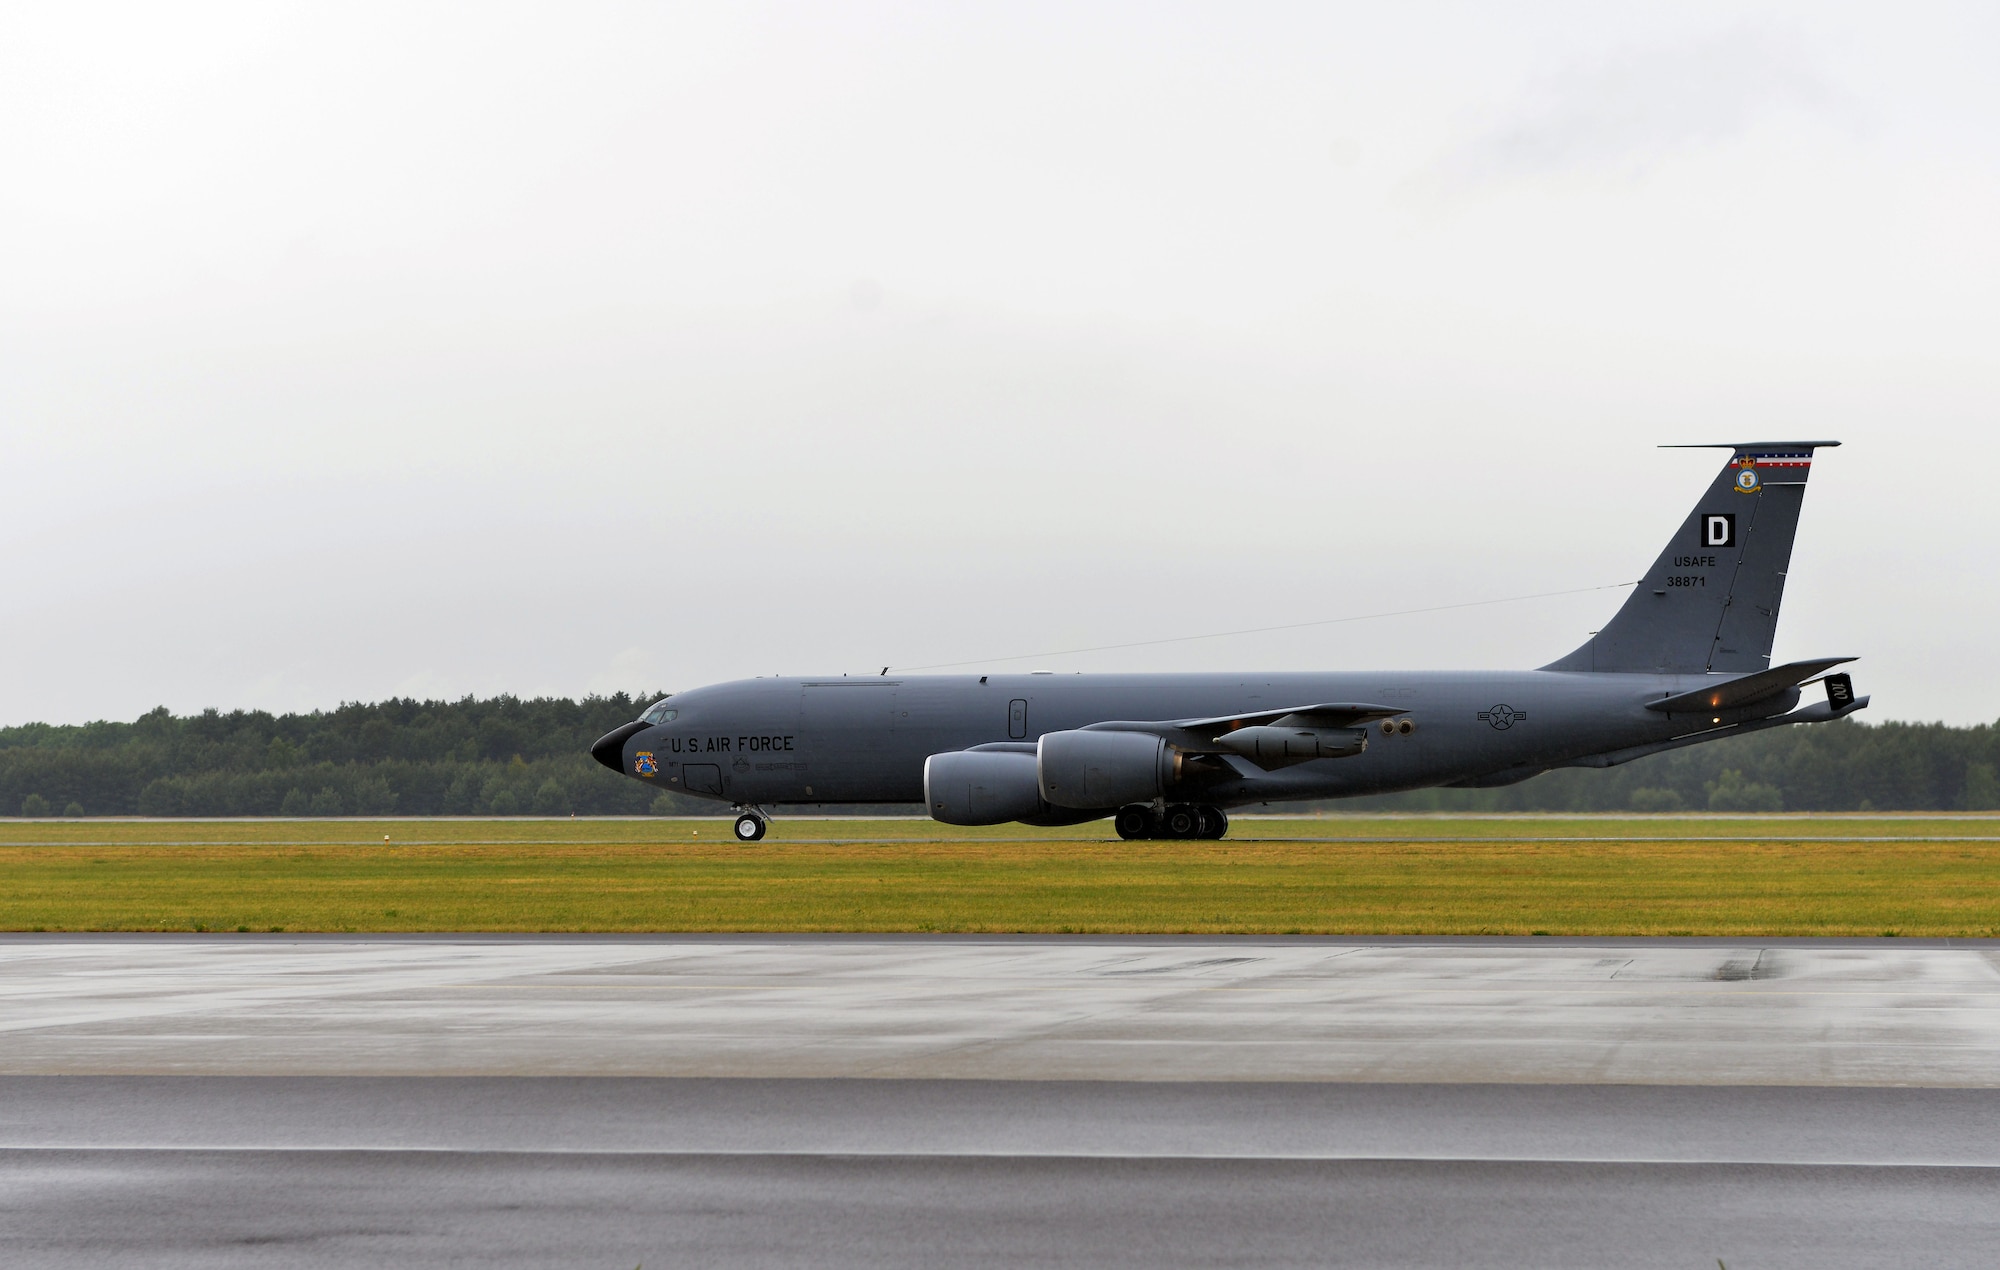 A KC-135 Stratotanker assigned to the 100th Air Refueling Wing taxis down a runway, June 9 2015, at Powidz, Poland. The U.S. Air Force deployed four KC-135s to Poland from the 100th, 916th and 507th air refueling wings, as well as 14 F-16 Fighting Falcons from the 480th and 157th fighter squadrons, and three B-52 Stratofortress’ from the 5th Bomb Wing in support of the multinational maritime exercise Baltic Operations 2015. (U.S. Air Force photo by Senior Airman Michael Battles)